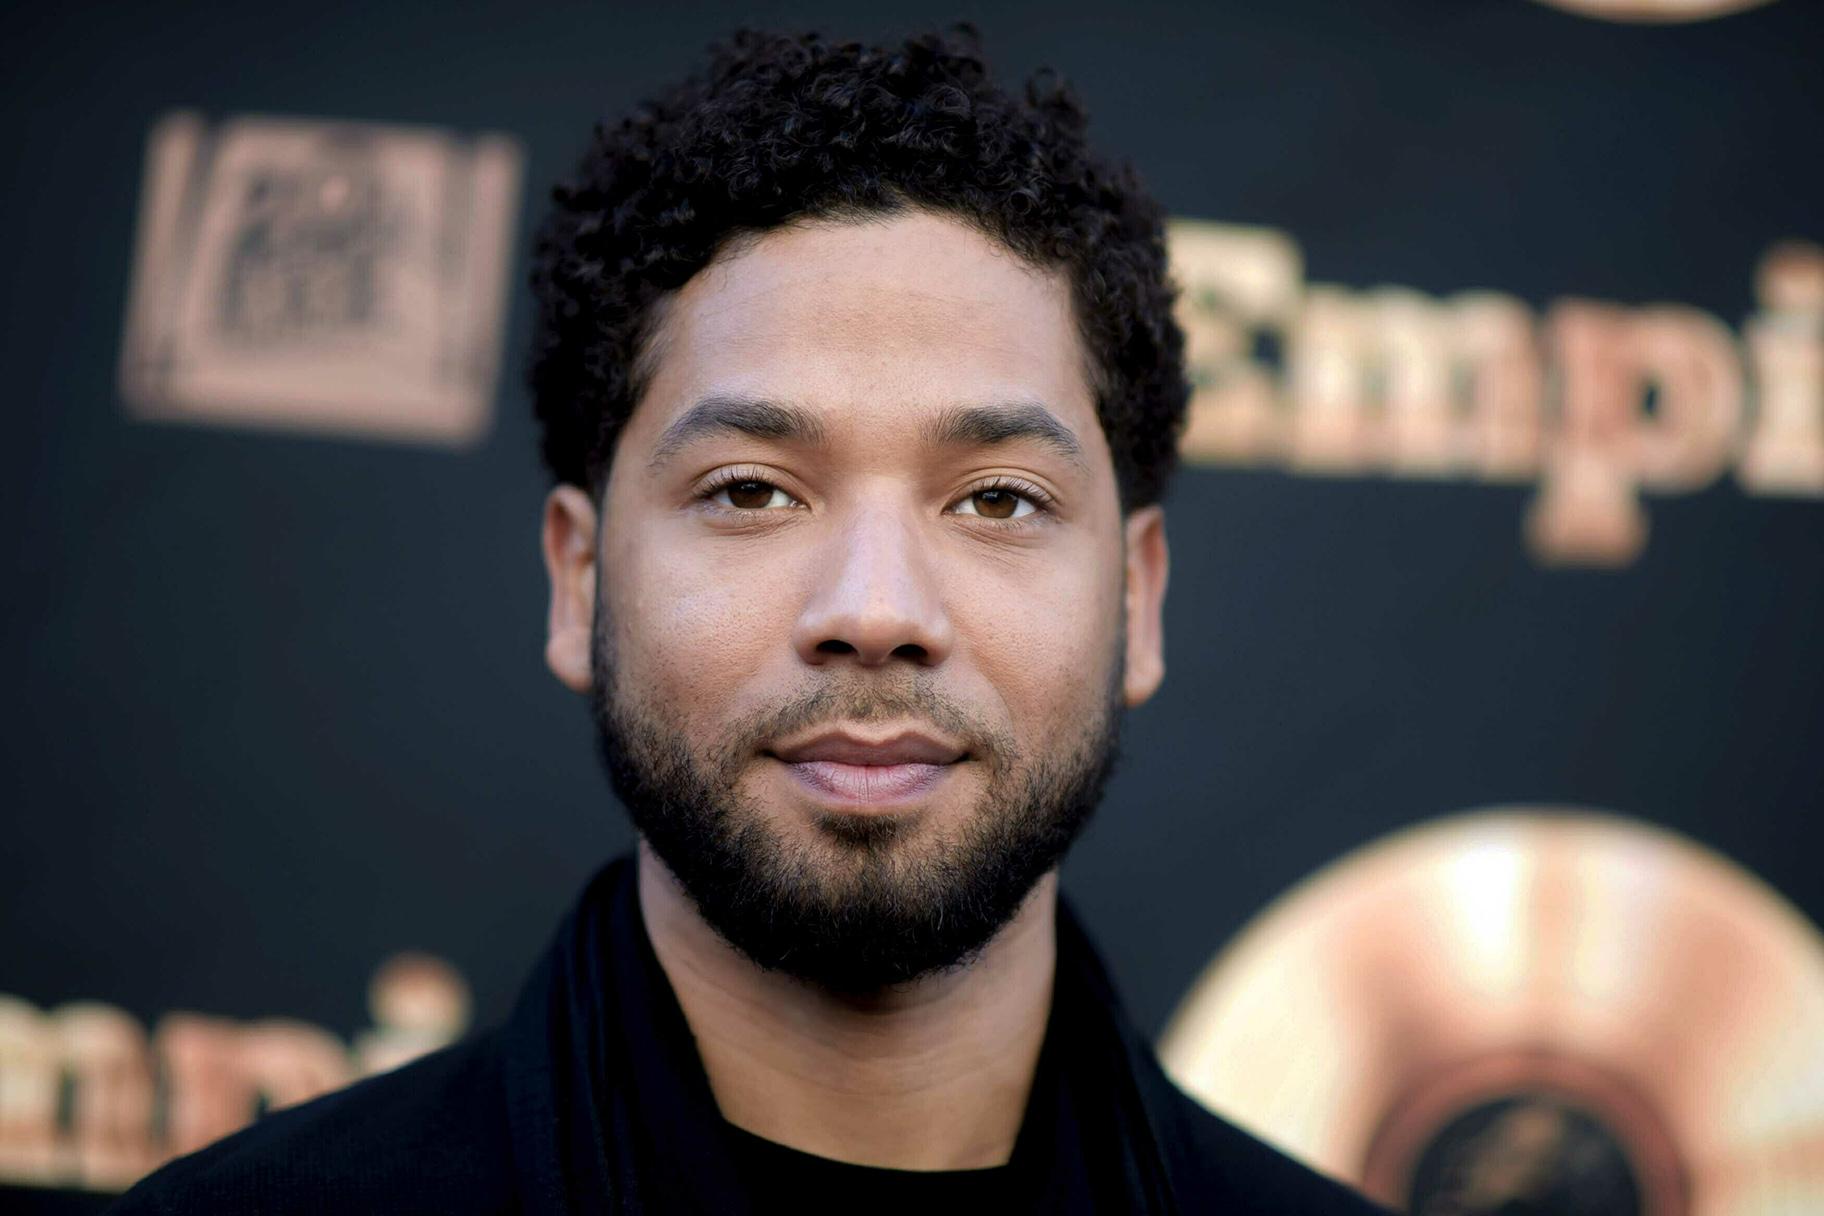 In this May 20, 2016 file photo, actor and singer Jussie Smollett attends the “Empire” FYC Event in Los Angeles. (Richard Shotwell / Invision / AP, File)